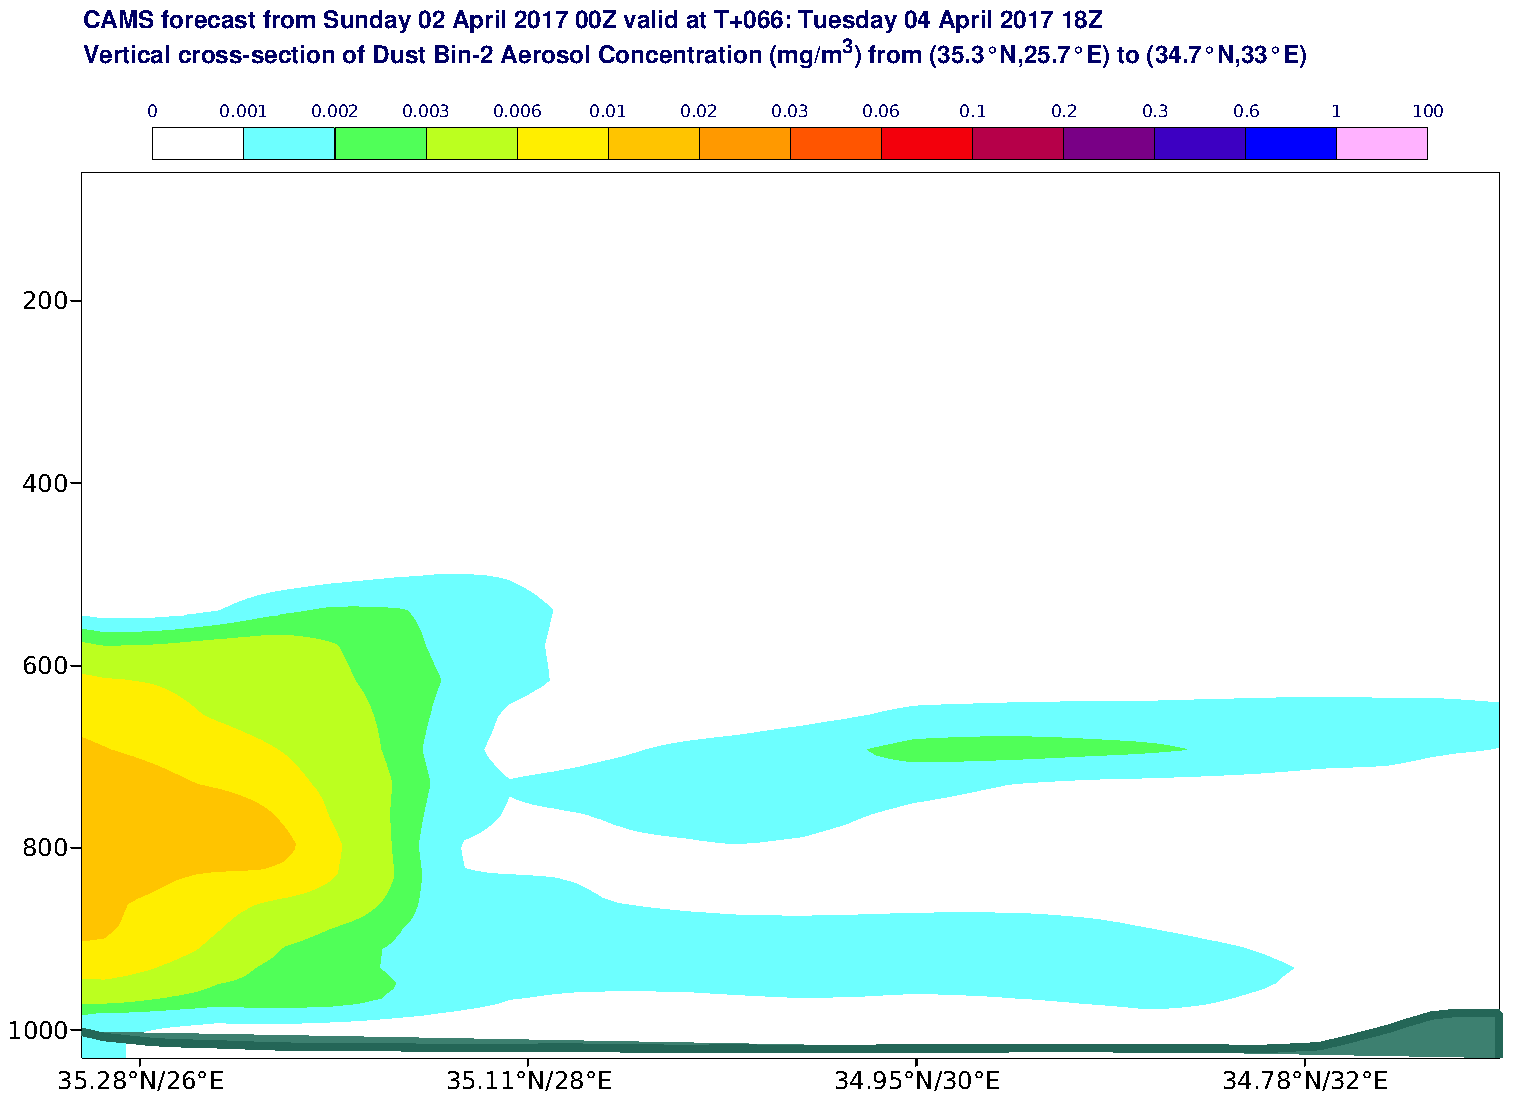 Vertical cross-section of Dust Bin-2 Aerosol Concentration (mg/m3) valid at T66 - 2017-04-04 18:00